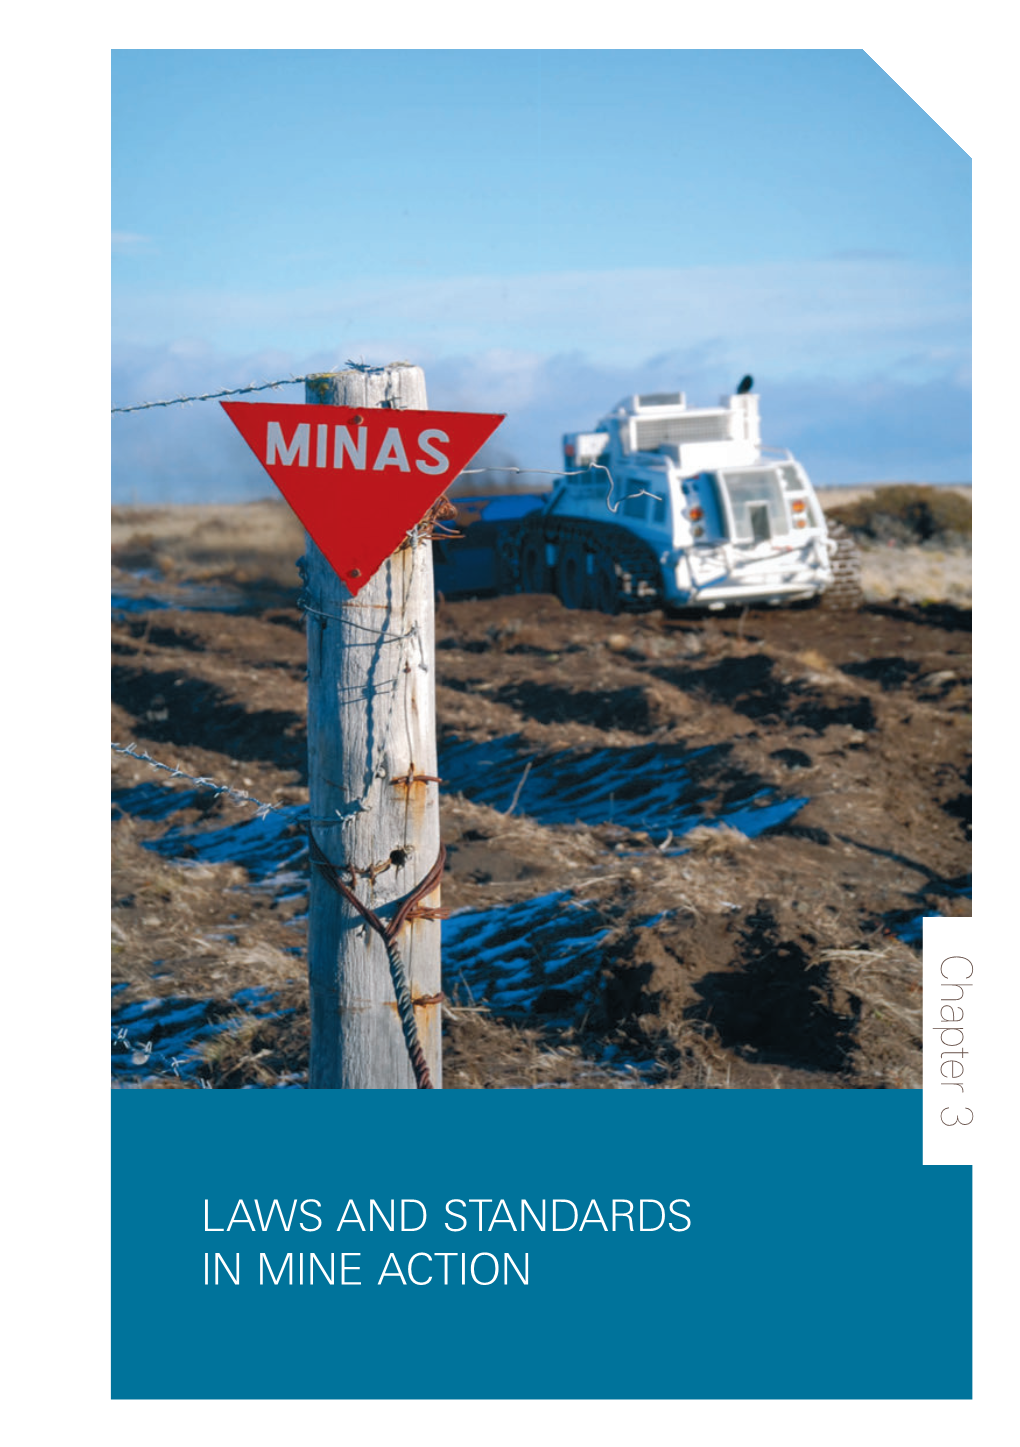 Laws and Standards in Mine Action Key Messages